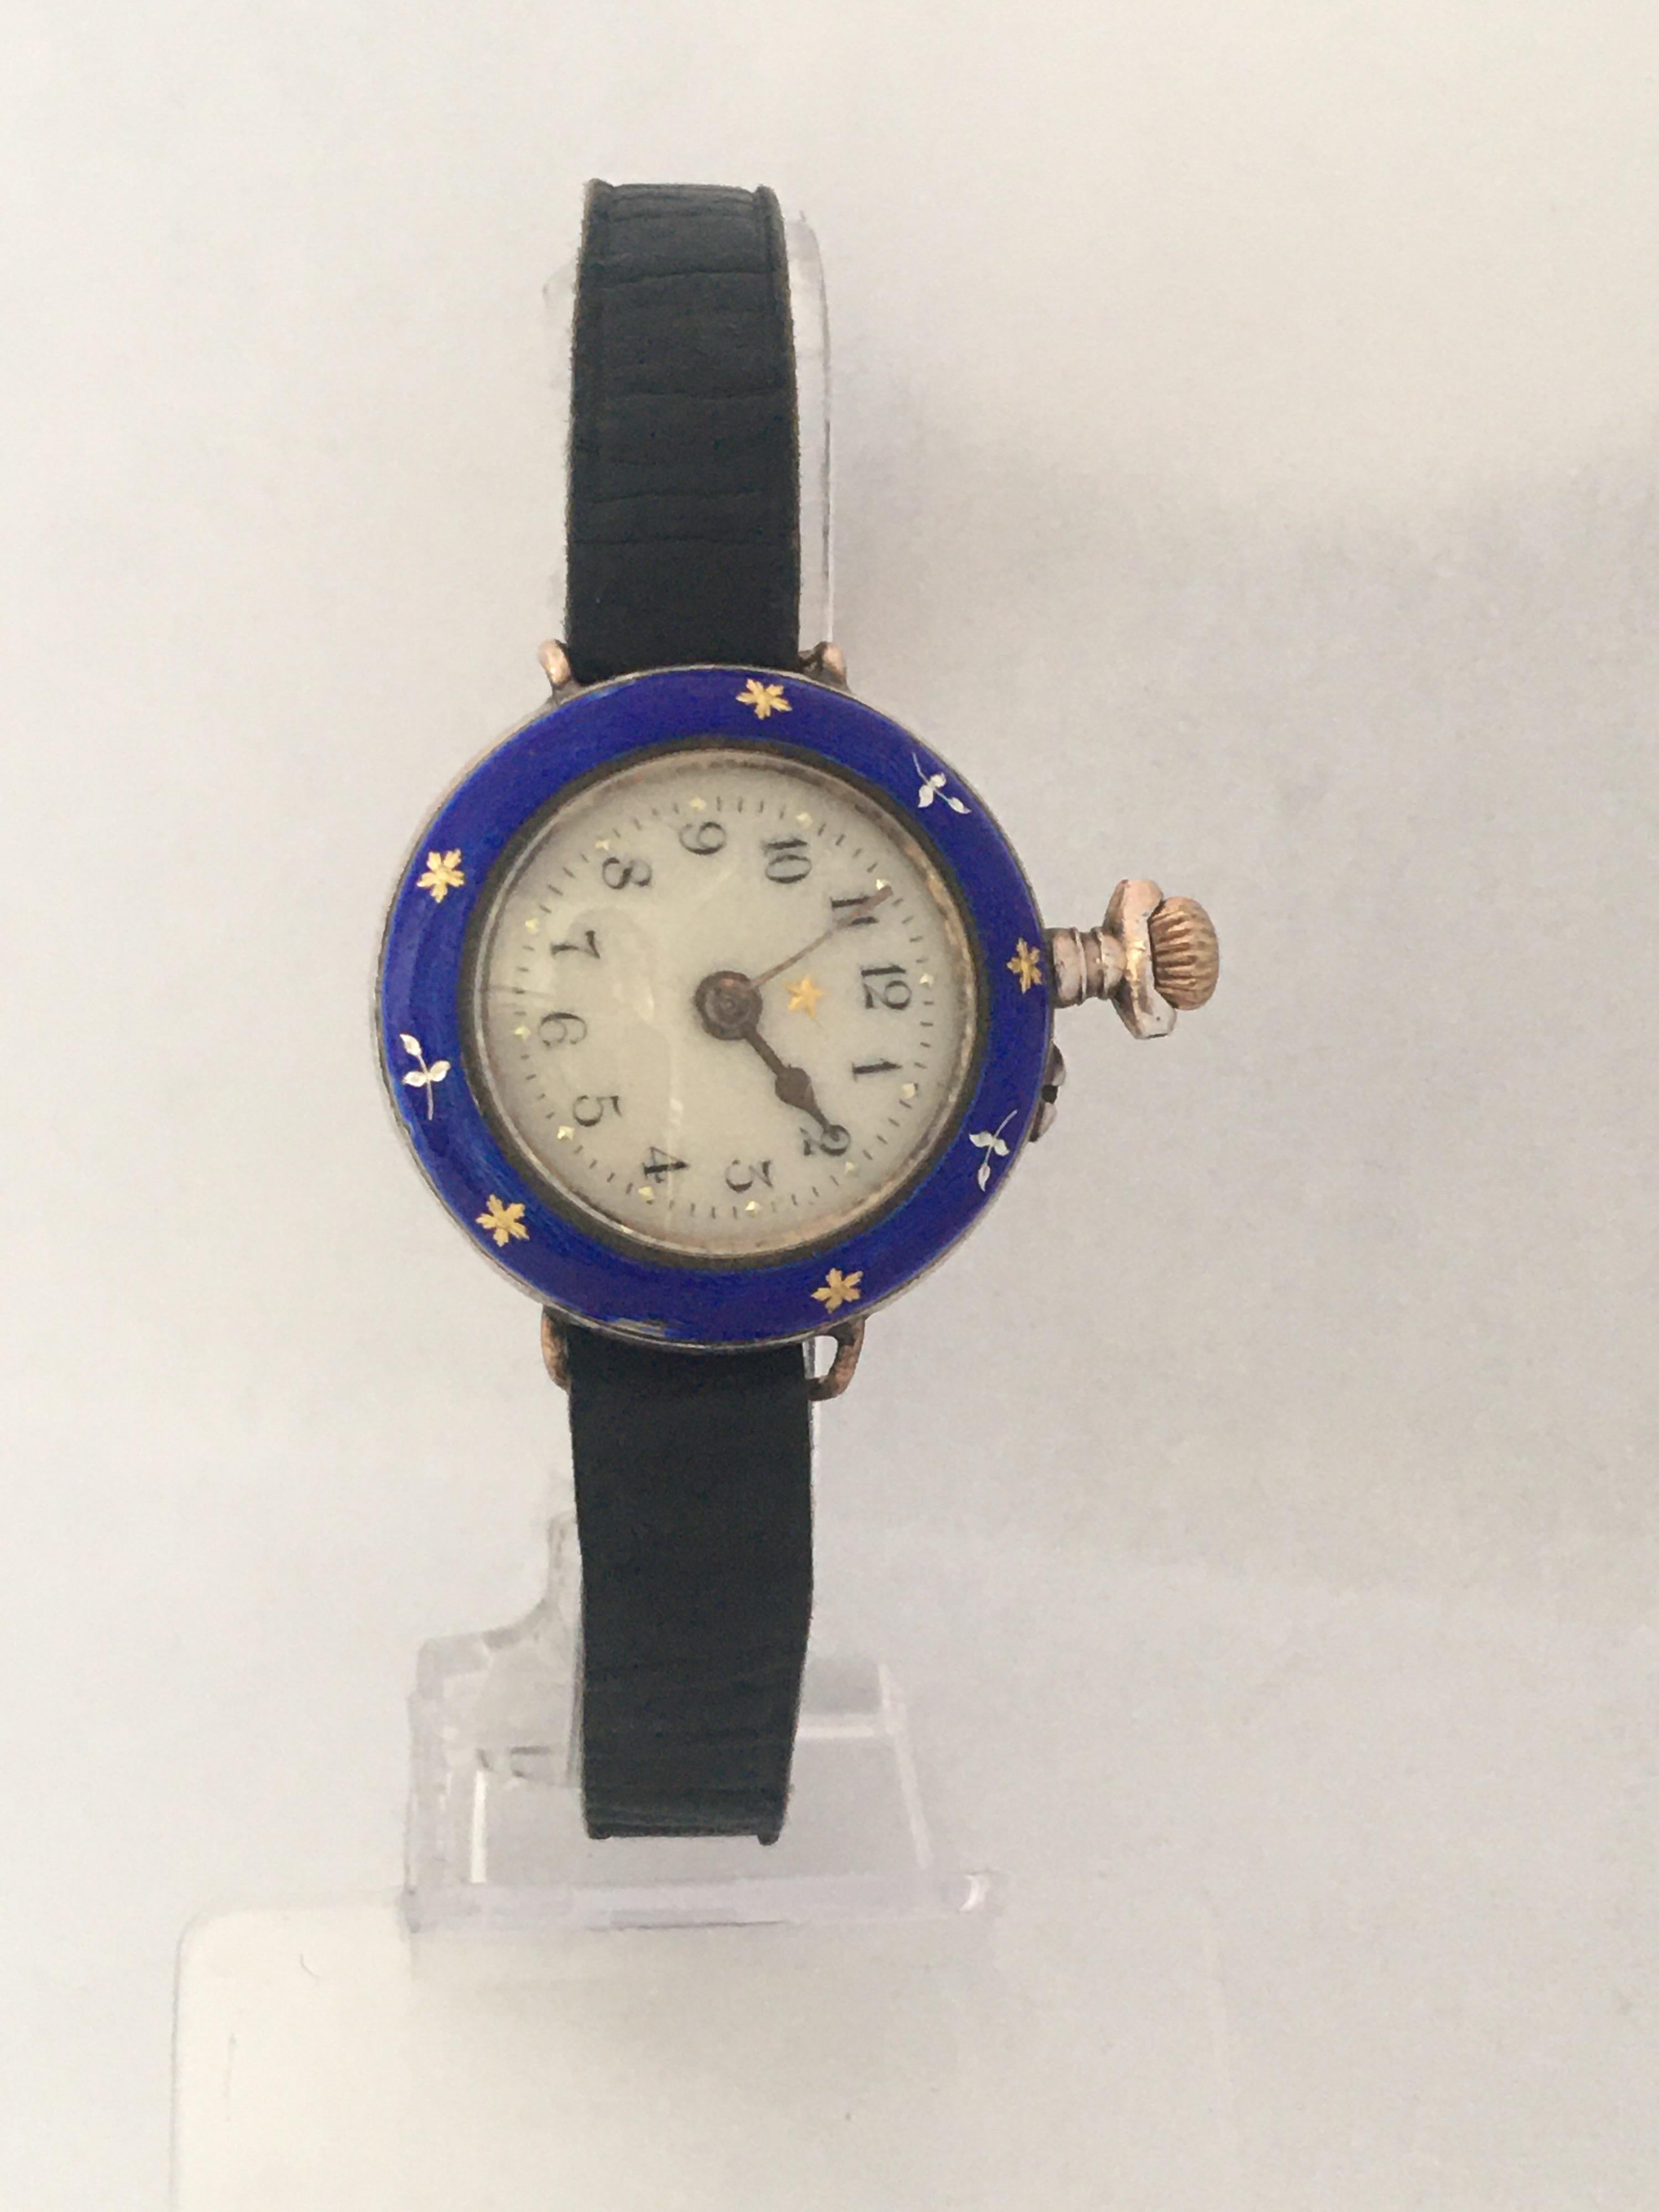 This beautiful antique hand winding trench watch is in good working condition and it is recently been serviced. Visible signs of ageing and wear with light and small scratches on the glass . There is a small chipped on the enamel case as shown.